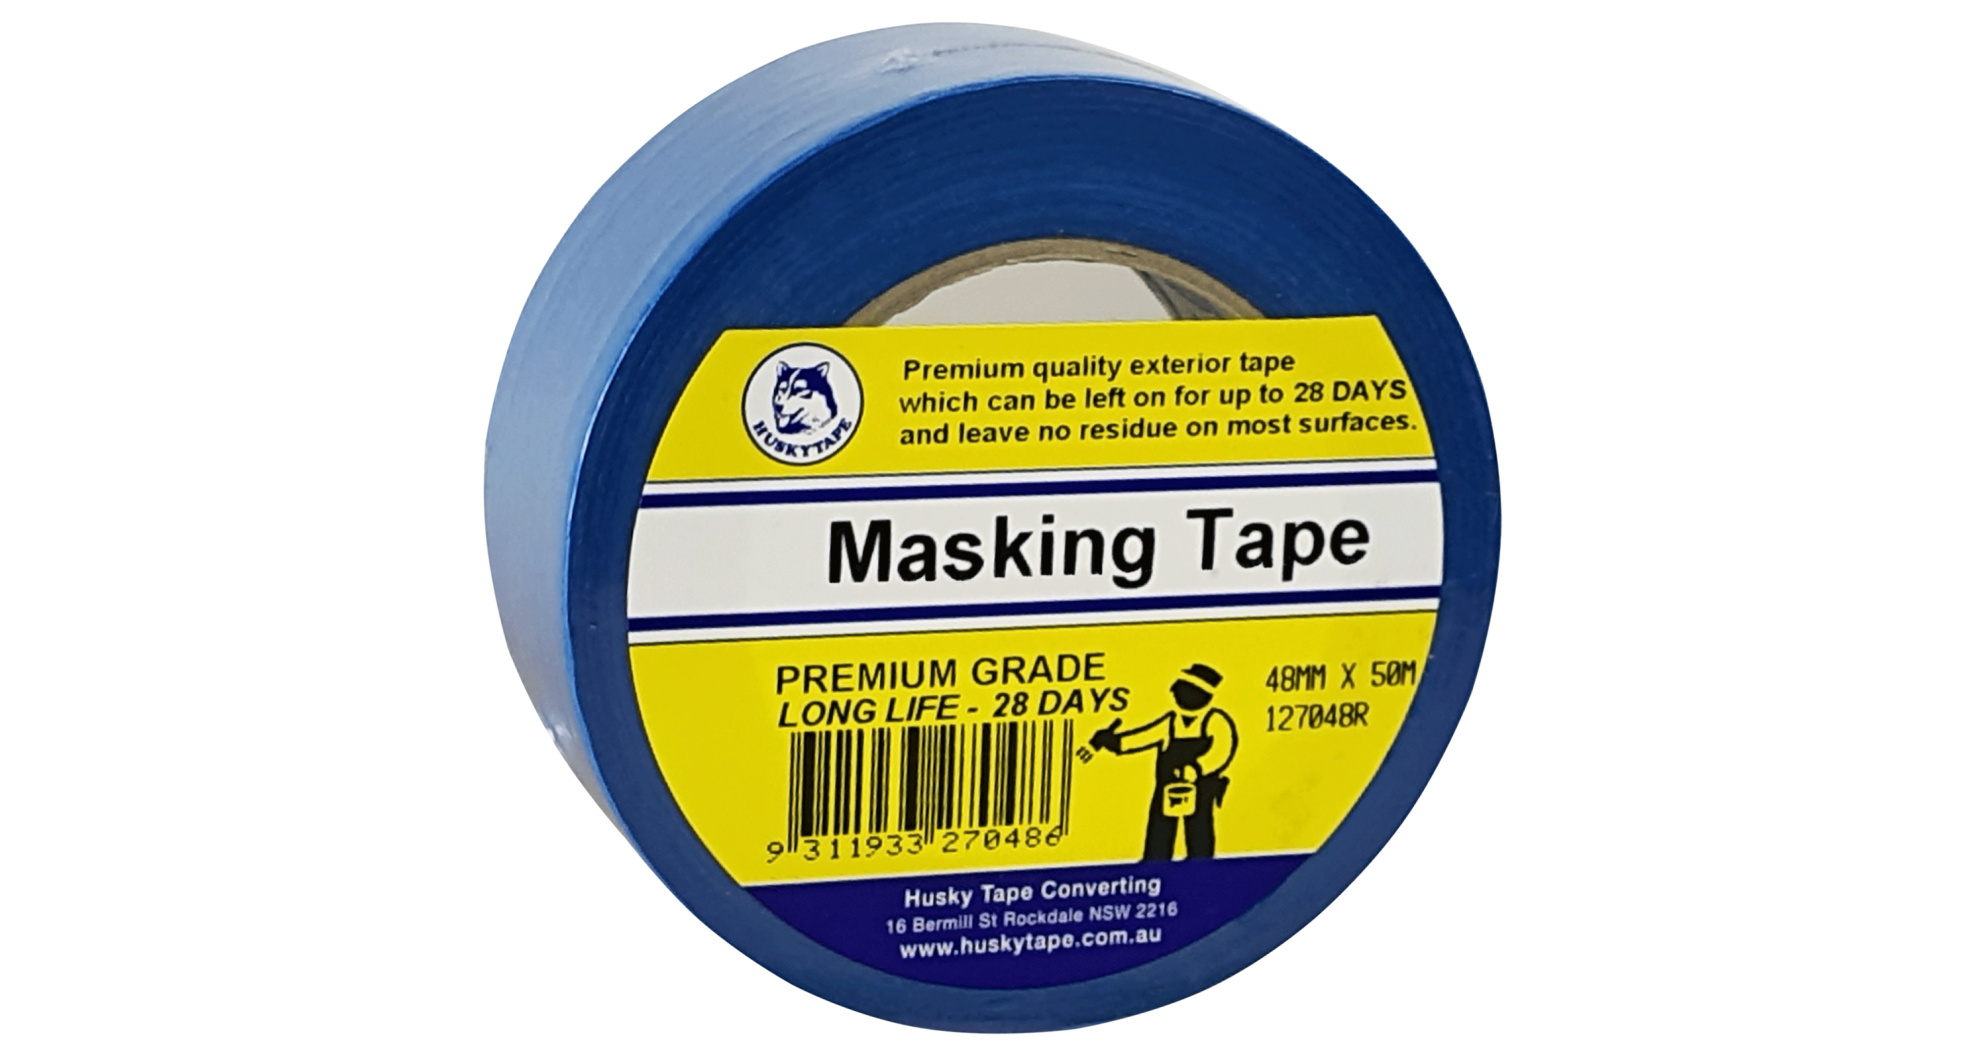 Tapes :: Mask / Paper Tape :: CP 27 1 Blue Masking (Painter's